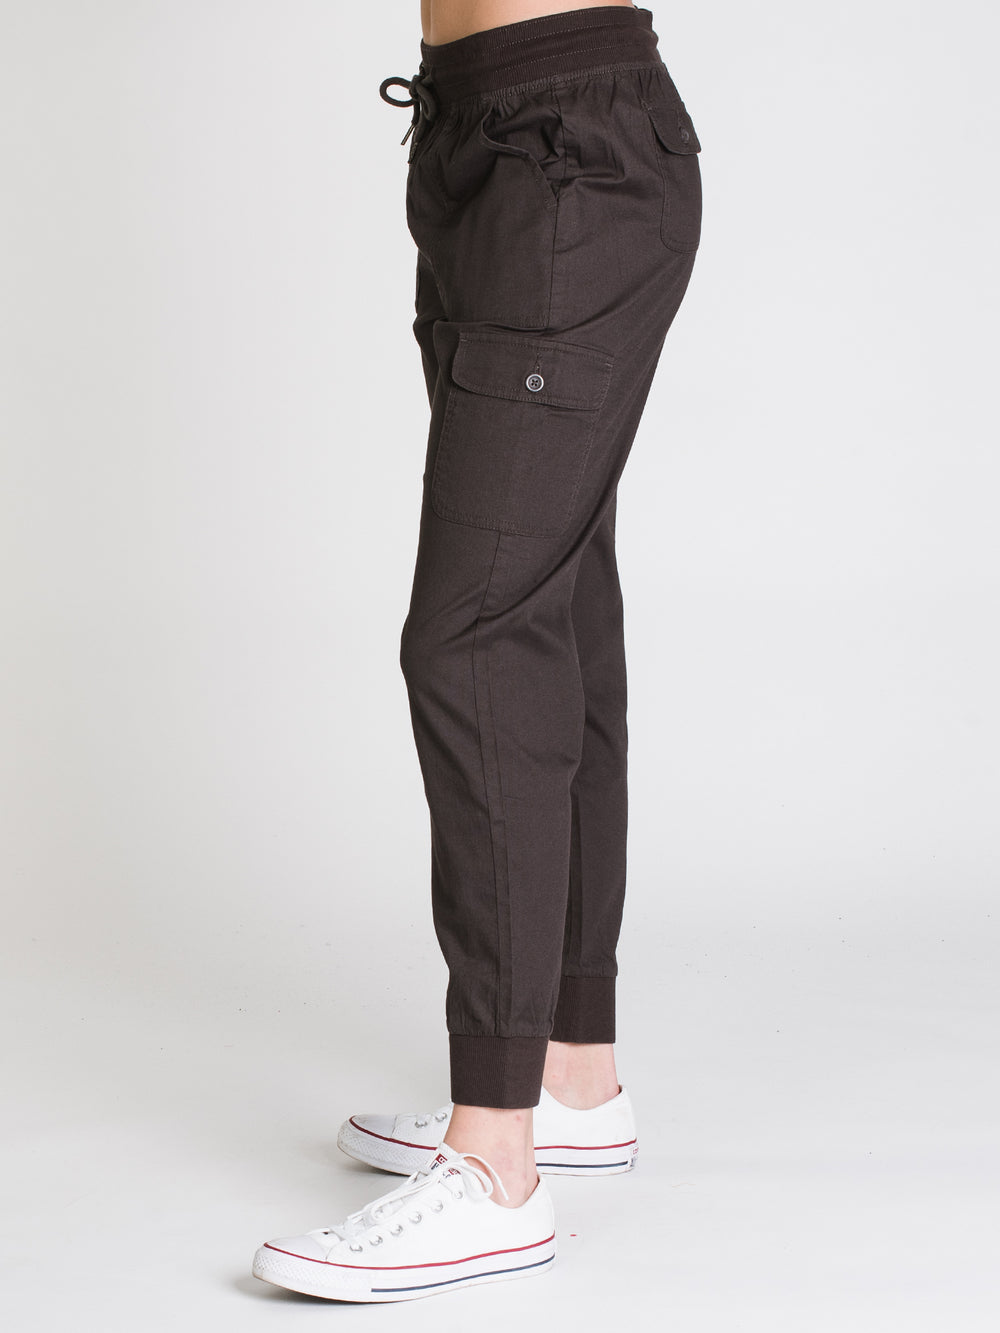 HARLOW CARGO JOGGER  - CLEARANCE